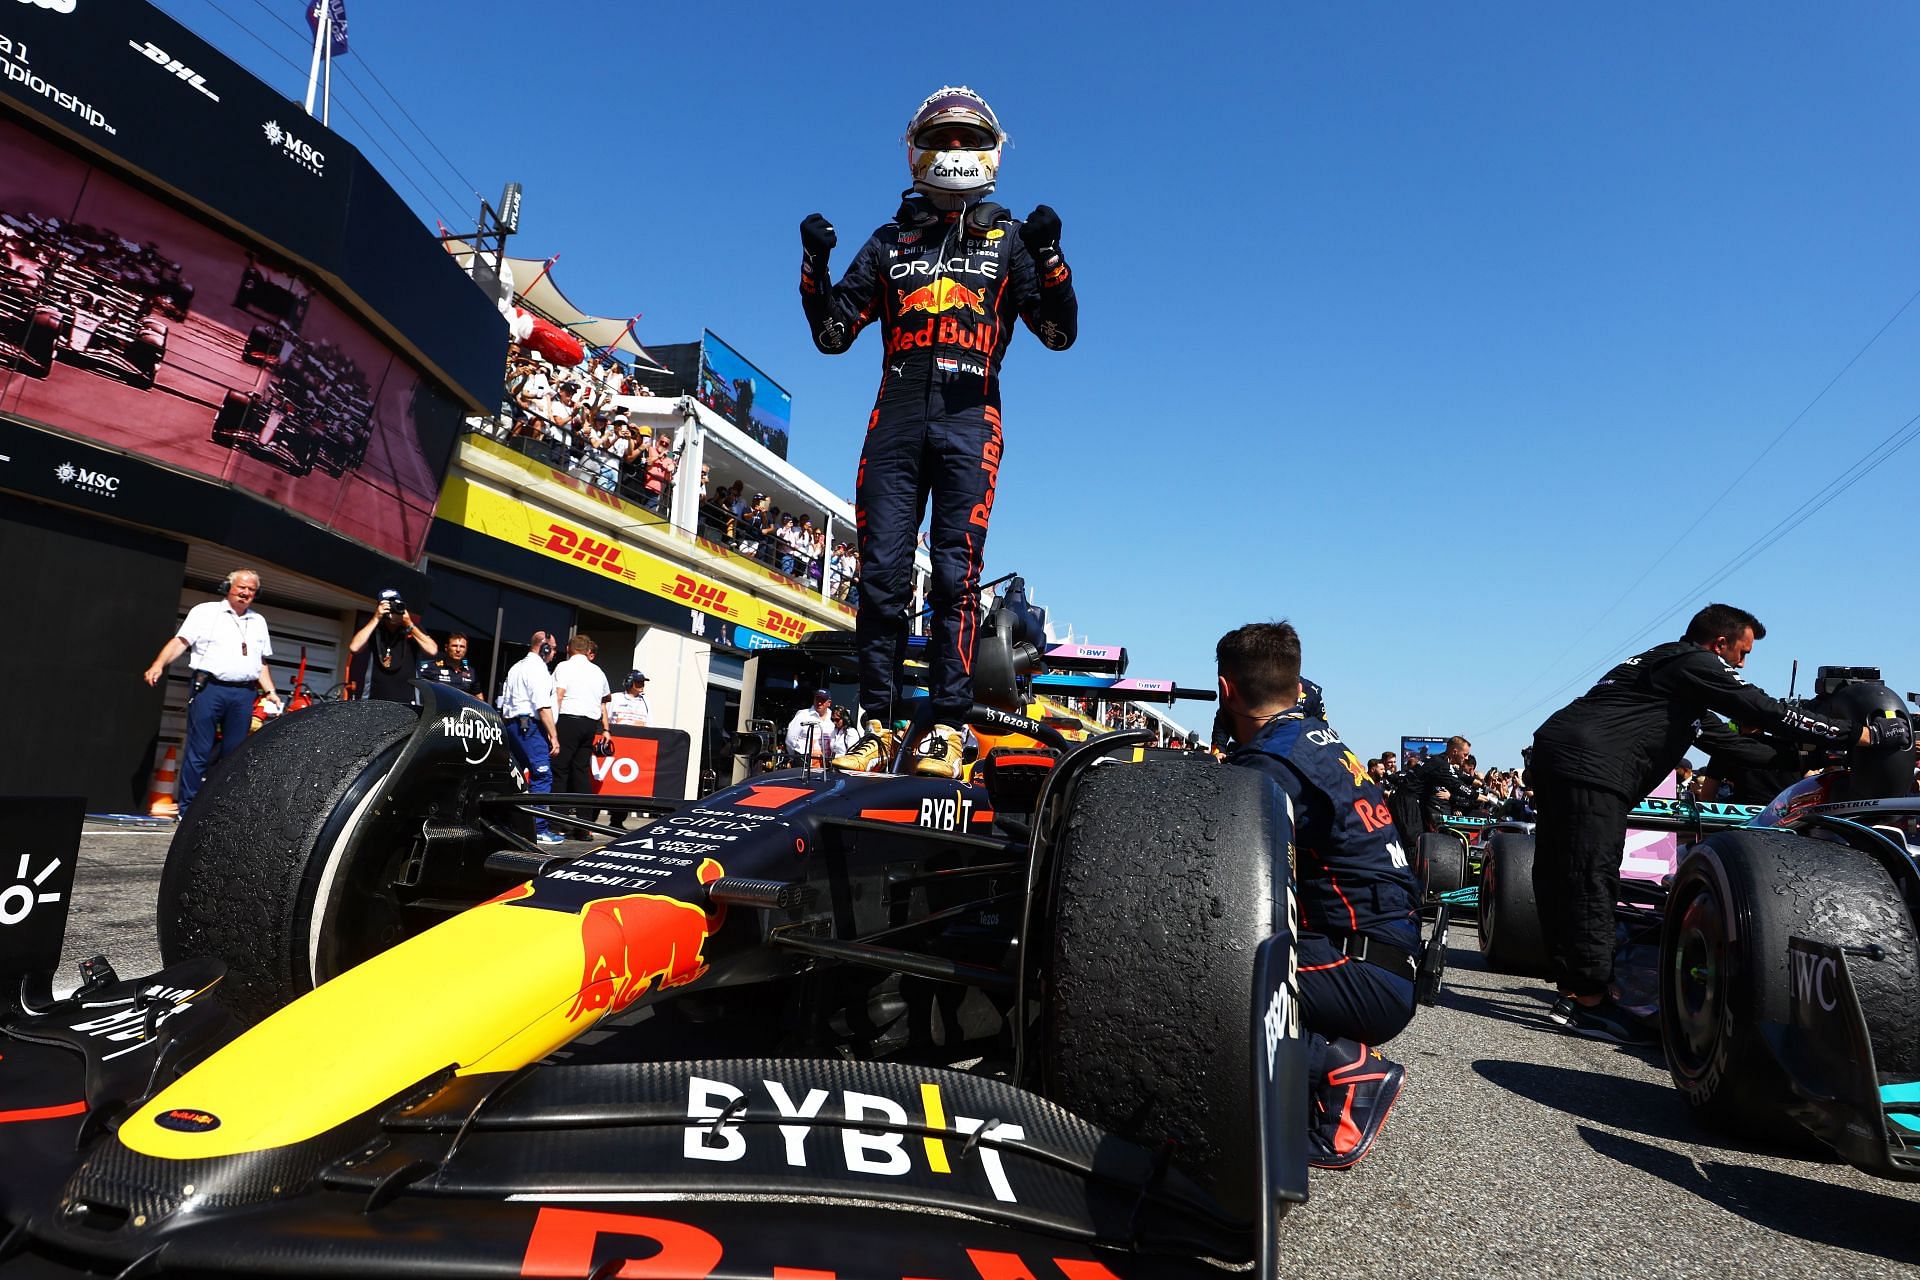 Race winner Max Verstappen celebrates in parc ferm&eacute; during the F1 Grand Prix of France at Circuit Paul Ricard on July 24, 2022, in Le Castellet, France. (Photo by Mark Thompson/Getty Images)